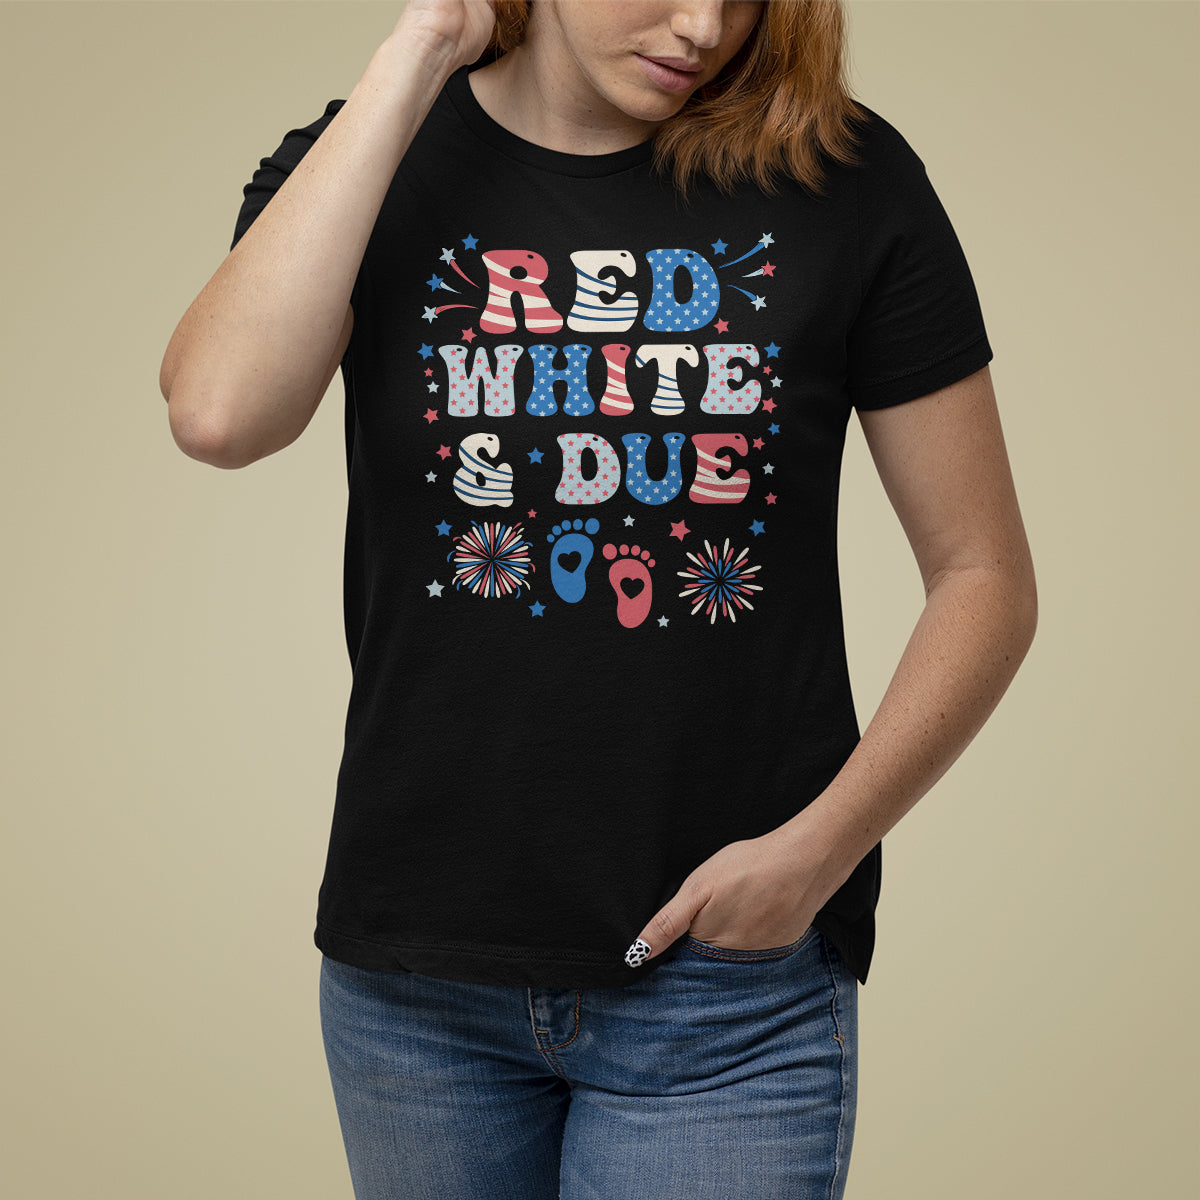 pregnancy-announcement-t-shirt-for-women-red-white-and-due-4th-of-july